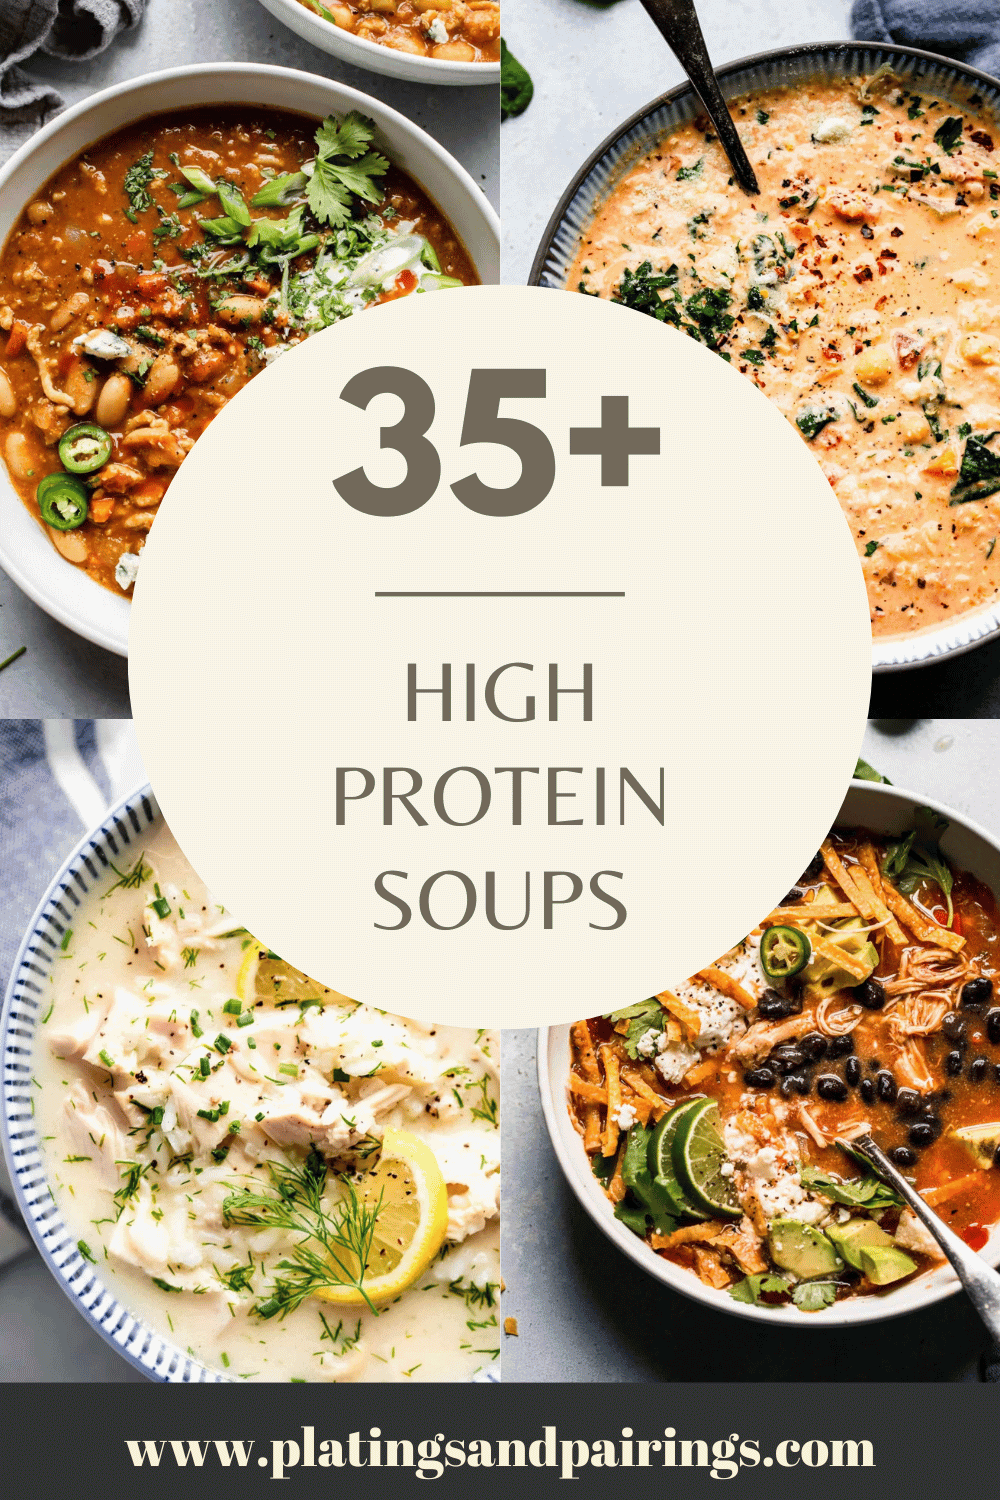 Collage of high protein soups with text overlay.